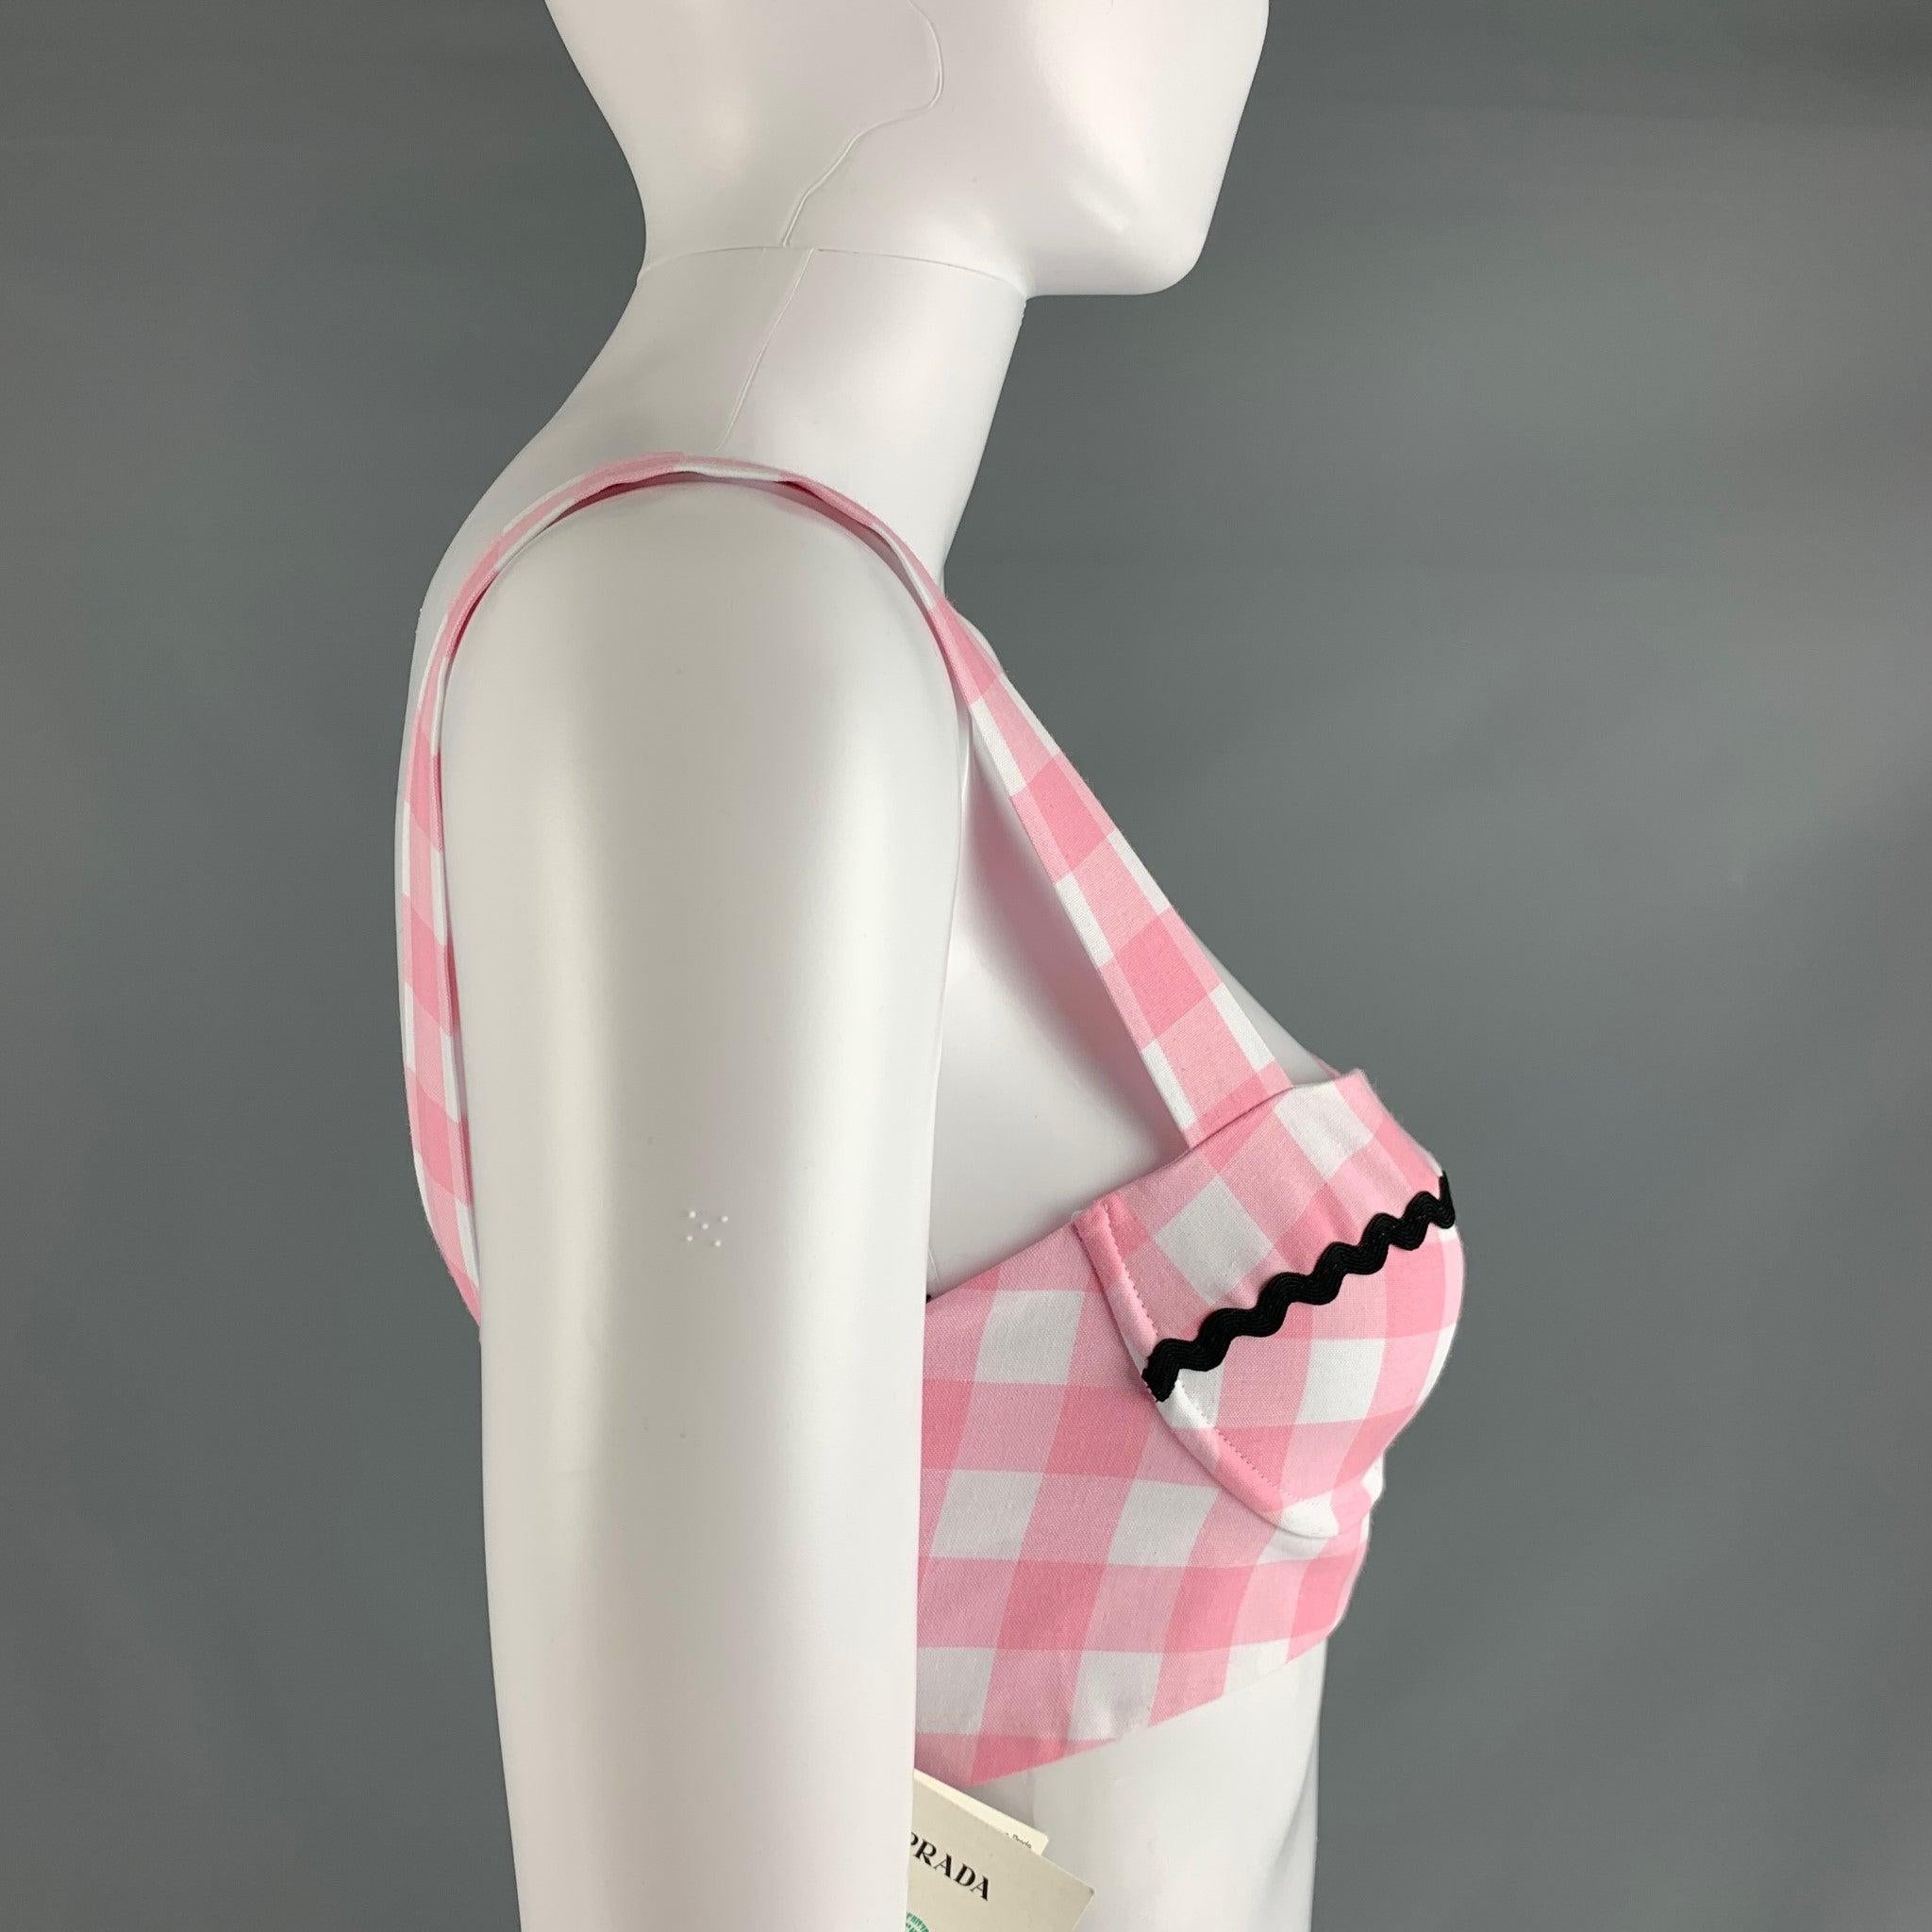 PRADA crop top comes in pink and white gingham cotton woven material featuring a cropped length, black ribbon details, and a pink zip up closure. Made in Italy. New with Tags. 

Marked:   38 

Measurements: 
  Bust: 29 inches Length:
 inches  
  
 